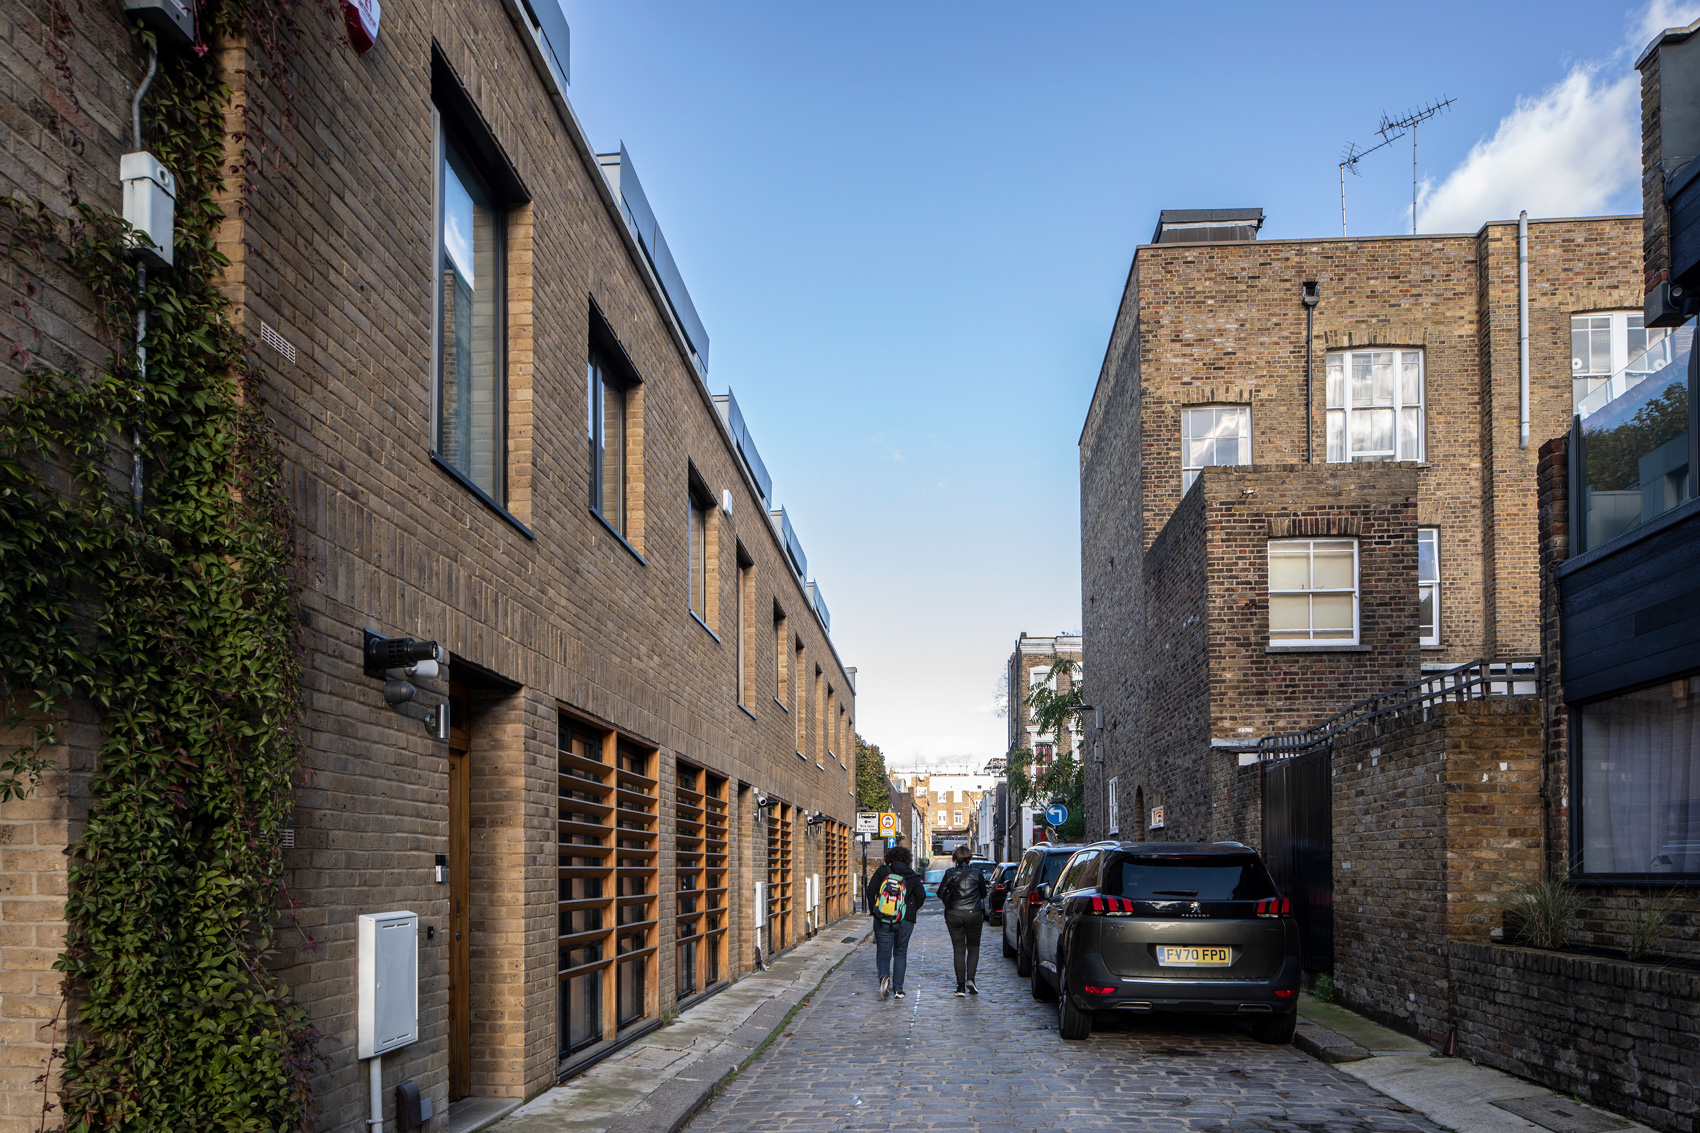 Mews House, Ashton Court, camden, conservation area, London, Residential Architecture, Residential, WWA Studios, WWA, West Waddy Archadia, West Waddy, Archadia, Architecture, Urban Design, Town Planning